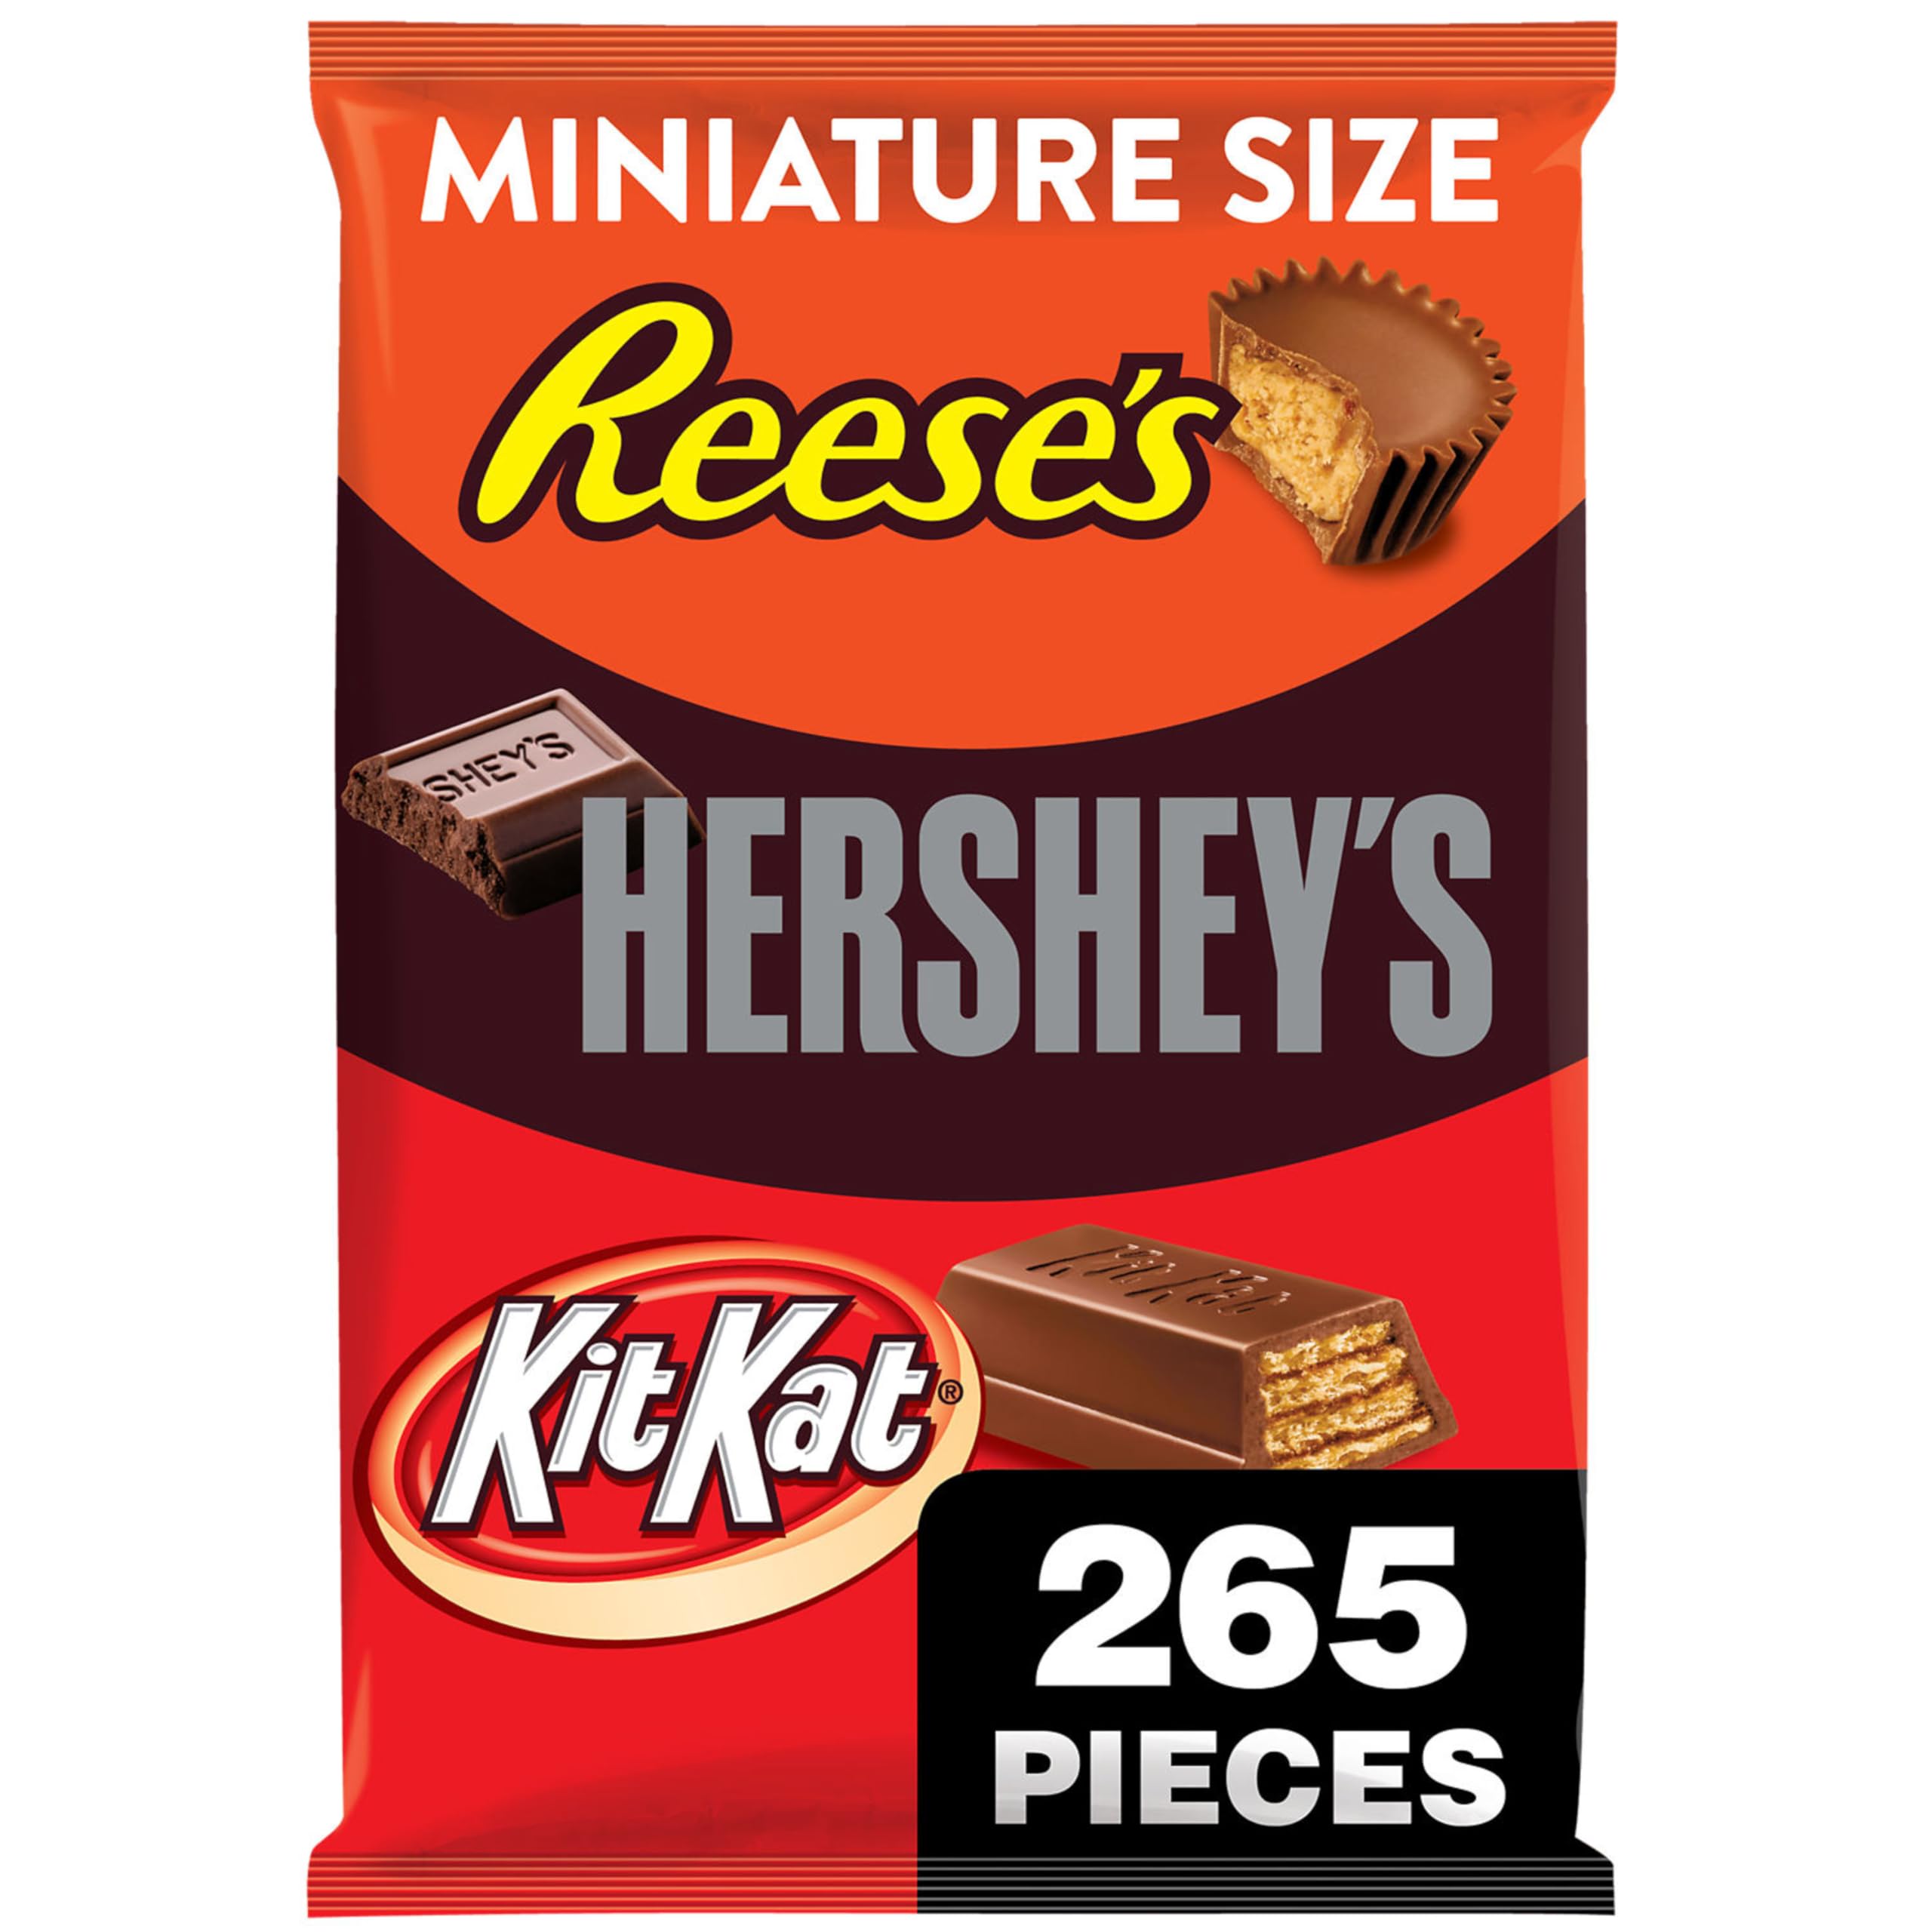 HERSHEY'S, KIT KAT and REESE'S Assorted Milk Chocolate, Candy Variety Bag, 80.39 oz (265 Pieces), List Price is $27.99, Now Only $18.19, You Save $9.8